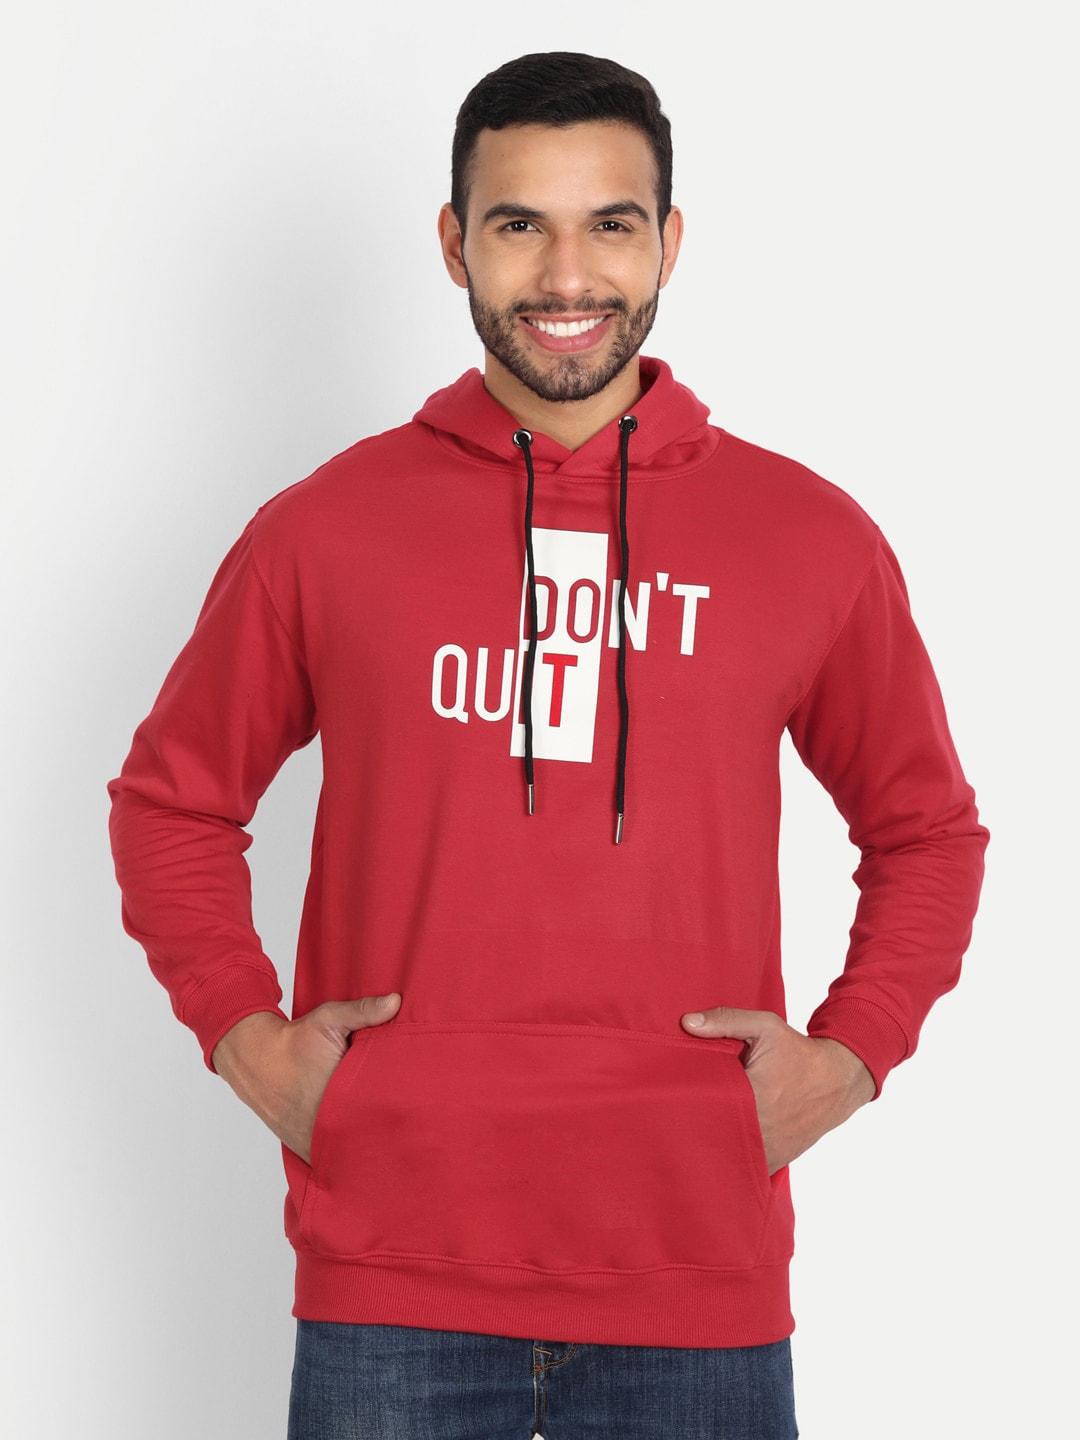 ABSOLUTE DEFENSE Printed Pure Cotton Hooded Pullover Sweatshirt